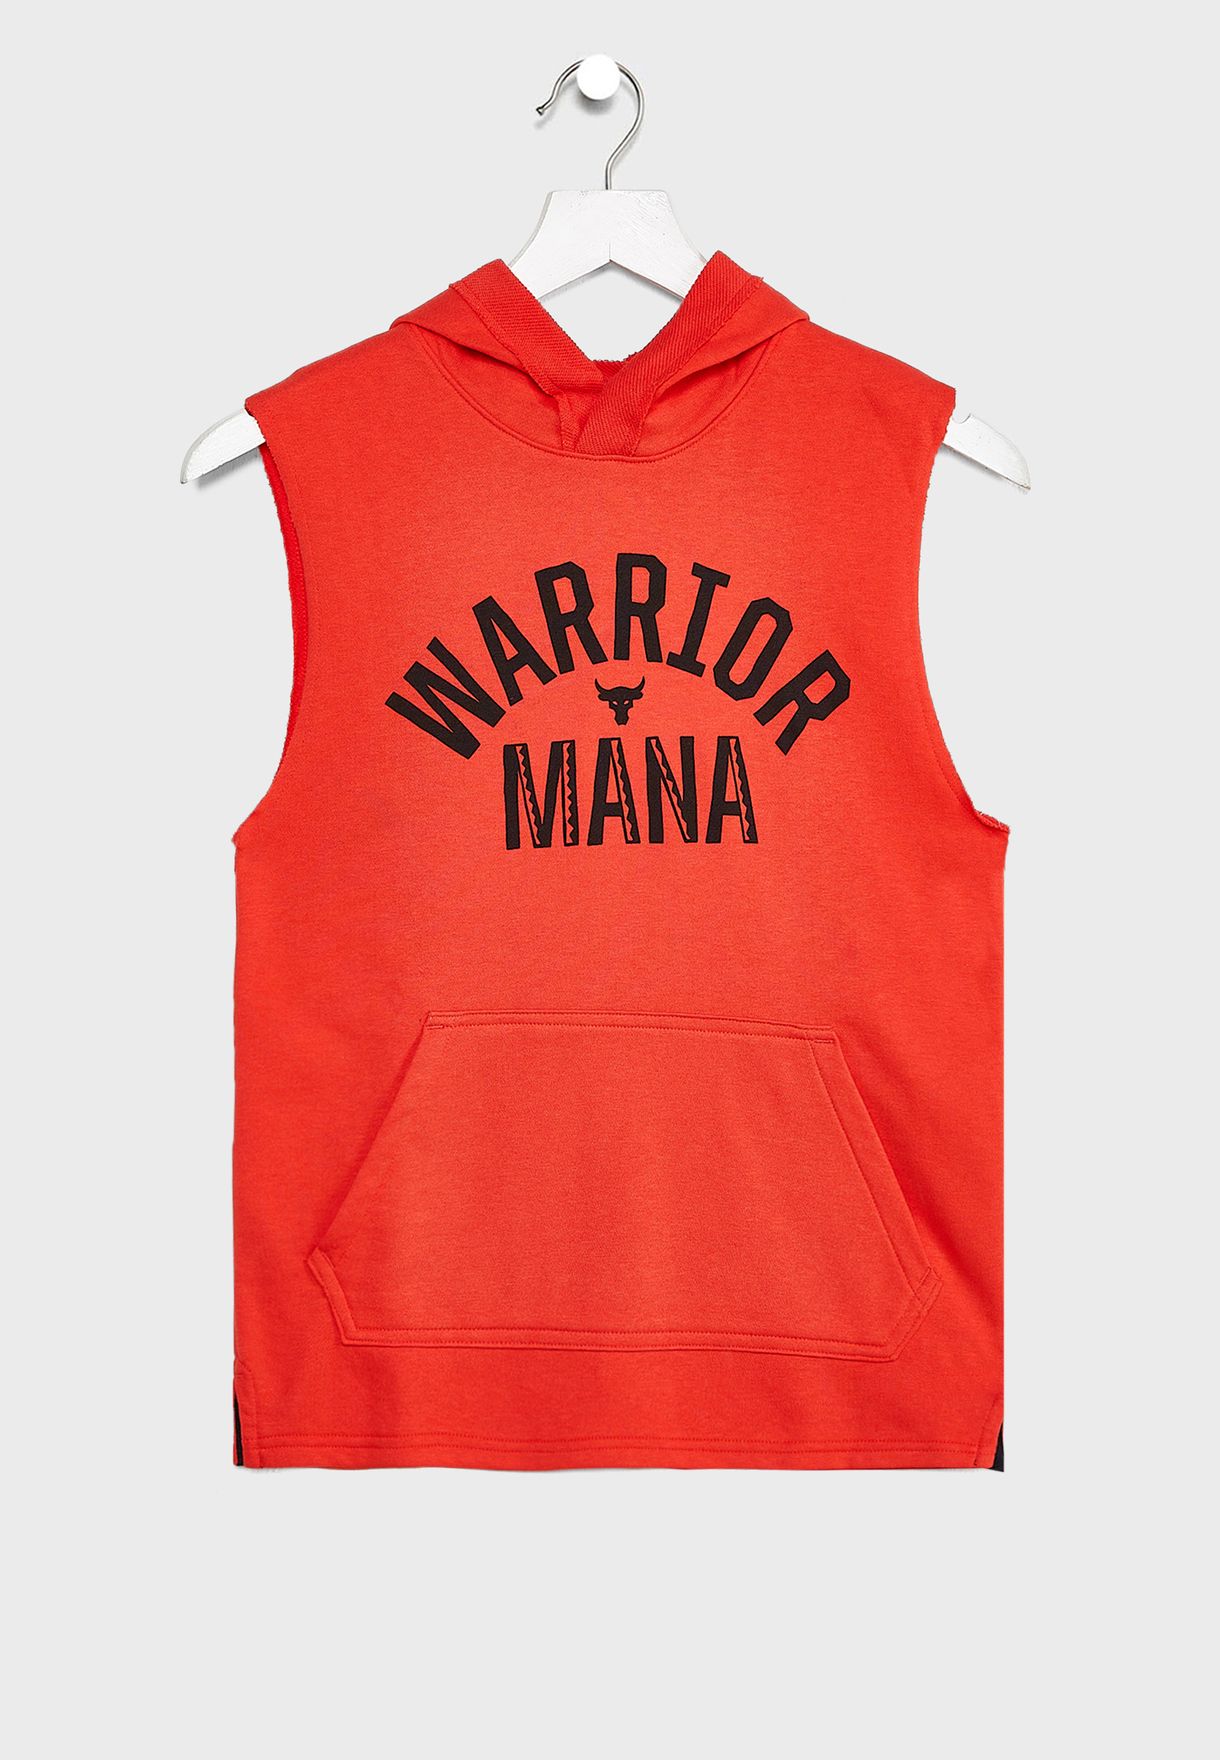 Under Armour Boy's Youth Project Rock Mana Sleeveless Hoodie Black 1351837 002